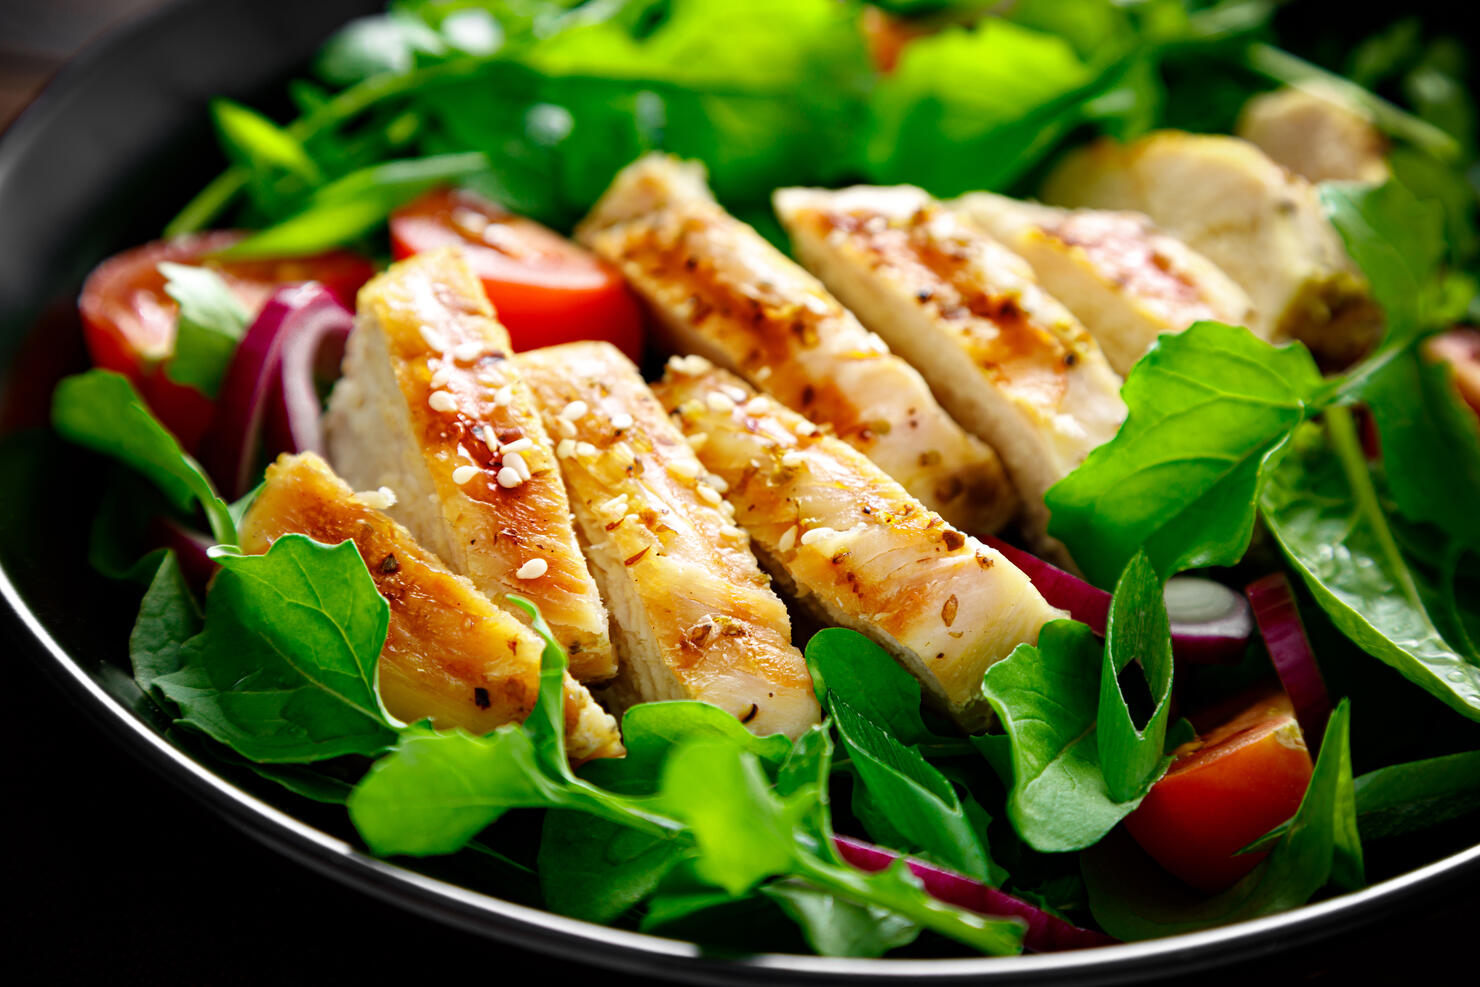 Grilled chicken breast and salad. Fresh vegetable salad with tomato, arugula, spinach and grilled chicken meat in bowl, healthy food.